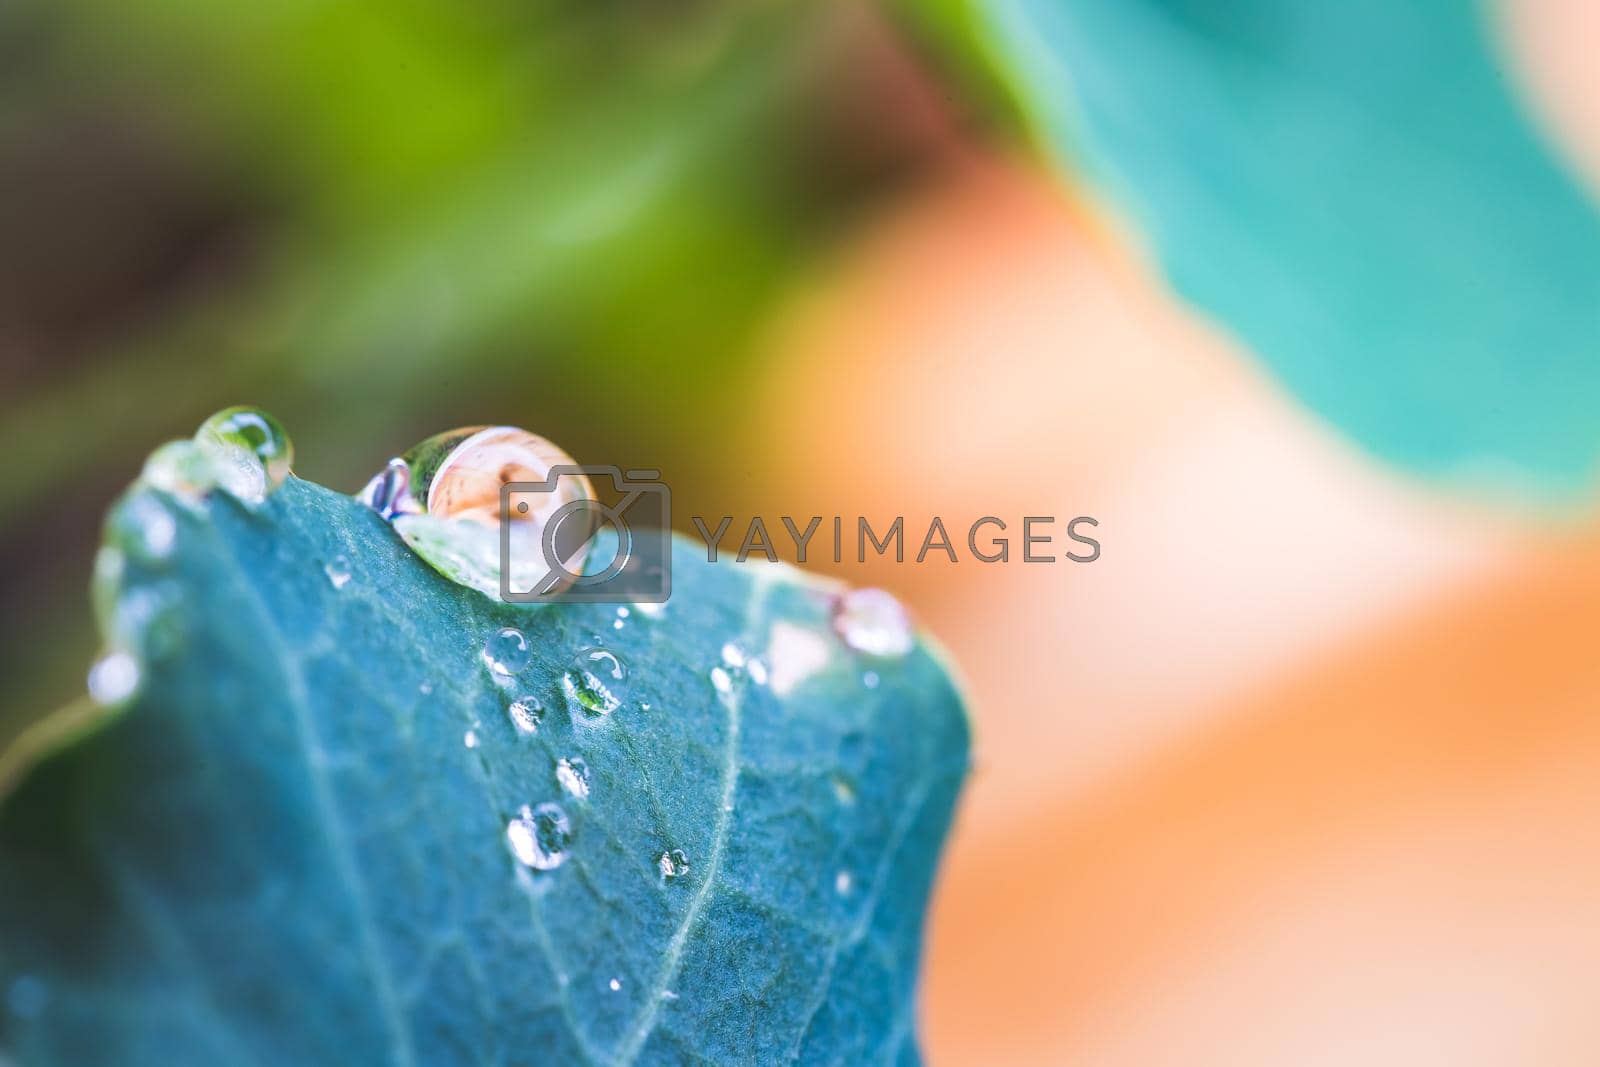 Royalty free image of Environment, freshness and nature concept: Macro of big waterdrops on green leaf after rain. Beautiful leaf texture. by Daxenbichler